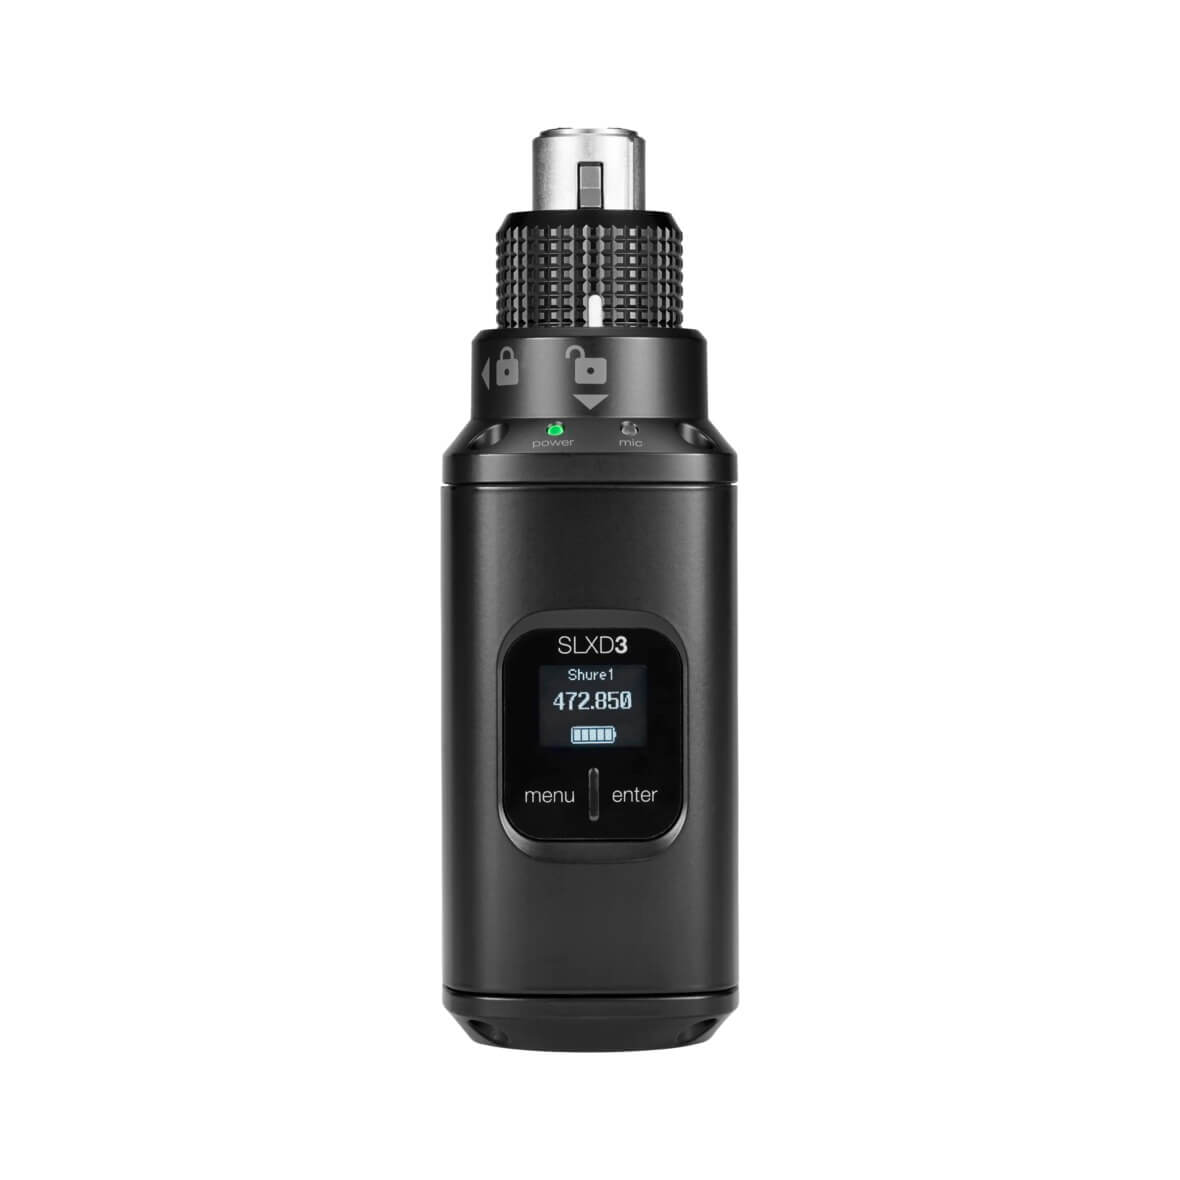 Shure SLXD3 - Plug-on Digital Wireless Transmitter with XLR Connector, front